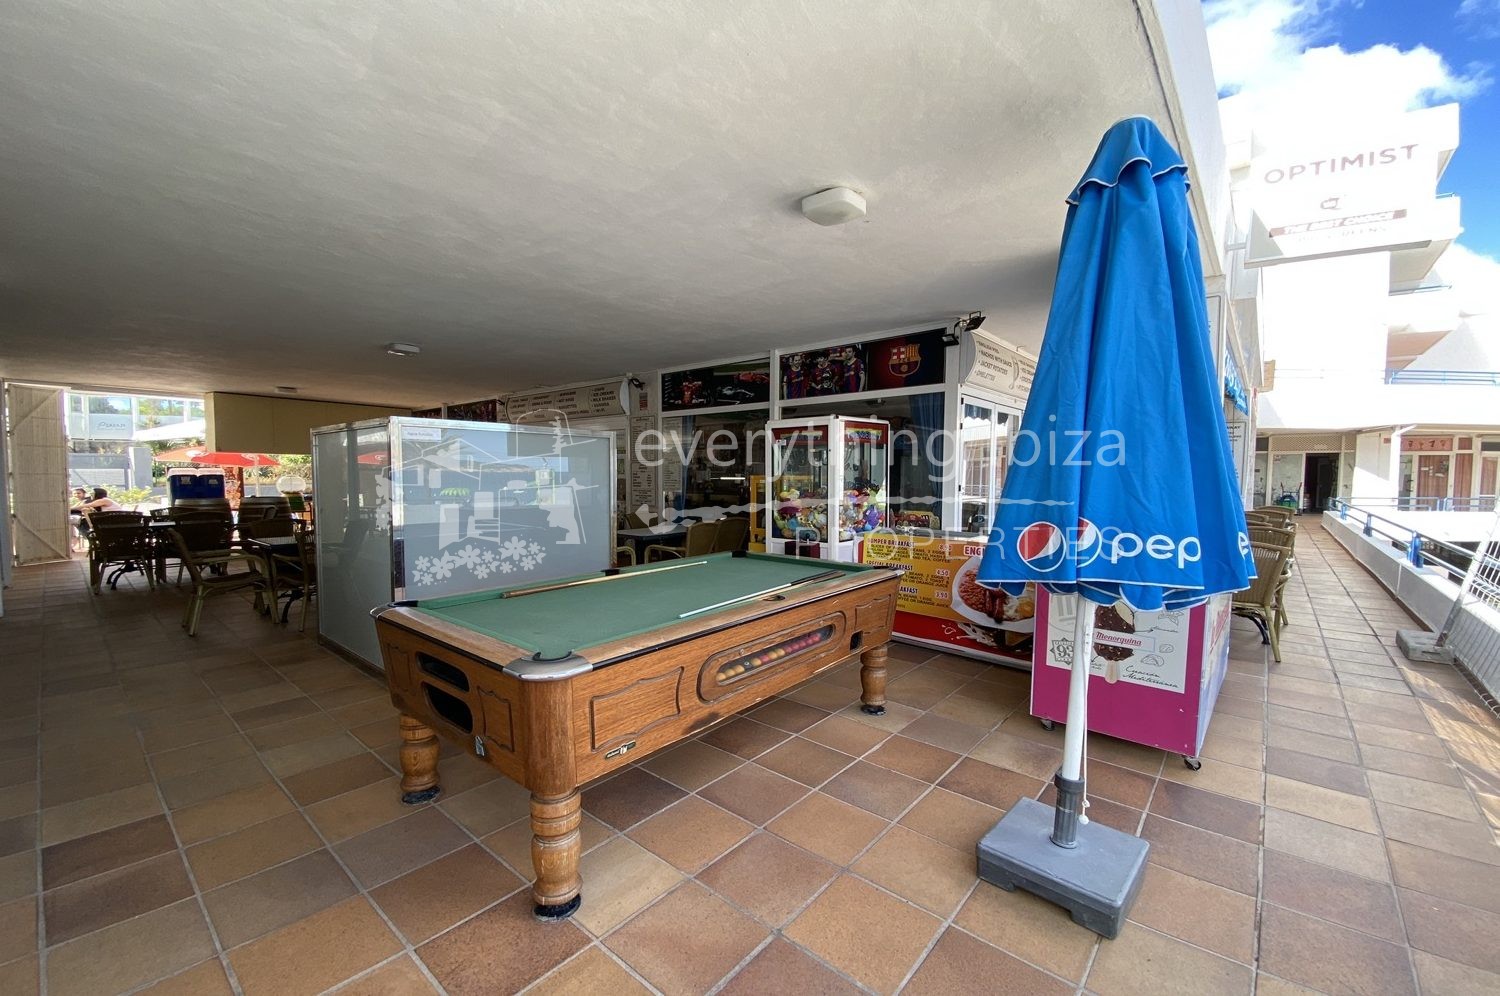 Popular sports bar & restaurant, ref. 1269, for sale in Ibiza by everything ibiza Properties